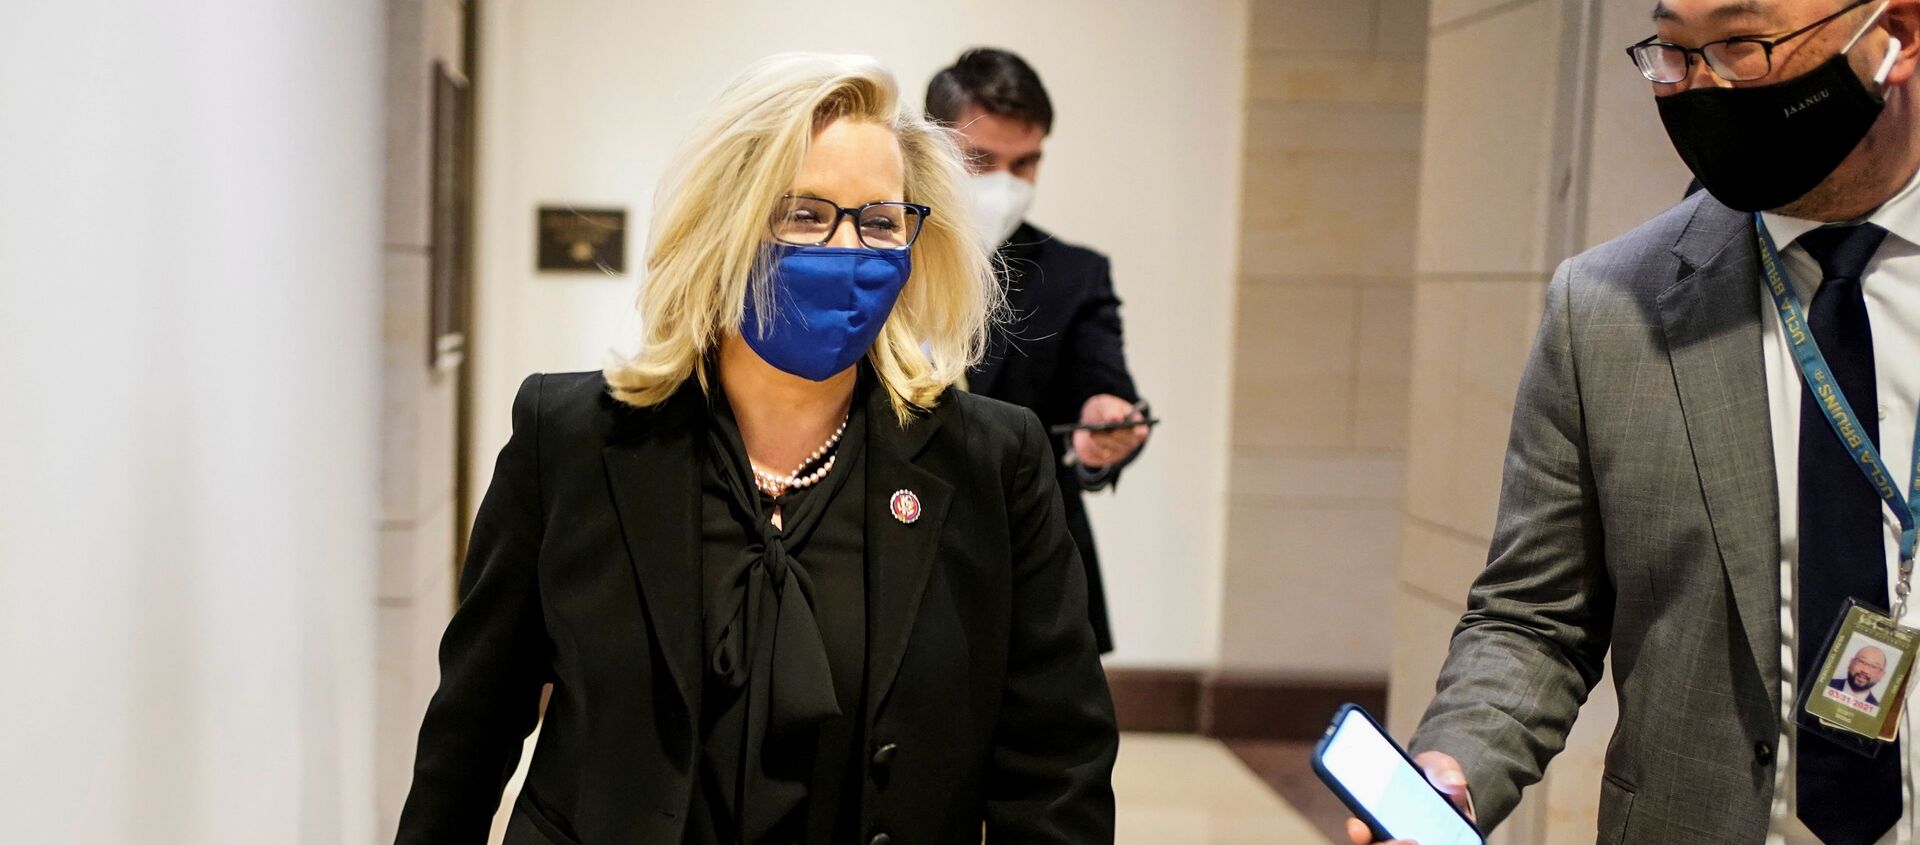 Liz Cheney (R-WY) departs after a House Republican Caucus meeting on Capitol Hill in Washington, U.S., February 3, 2021. - Sputnik International, 1920, 07.02.2021